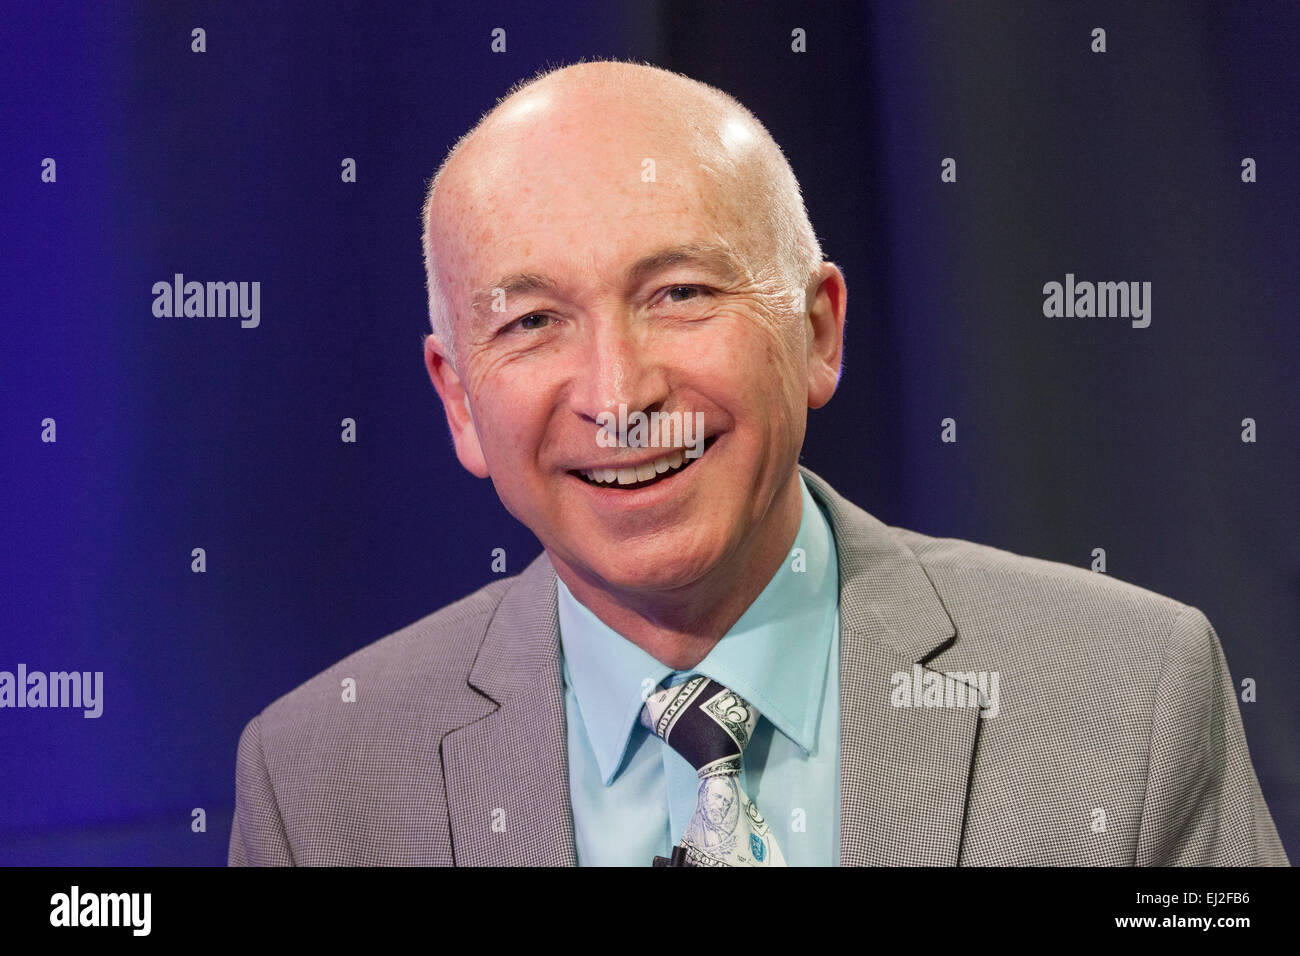 Walsall, West Midlands, UK. 20 March 2015. Comedy writer Colin Edmonds at a recording of ‘The David Hamilton Show’ for Big Centre TV. Hosted by presenter and broadcaster ‘Diddy’ David Hamilton the show features famous personalities from across the music and television spectrum. Credit:  John Henshall / Alamy Live News PER0513 Stock Photo